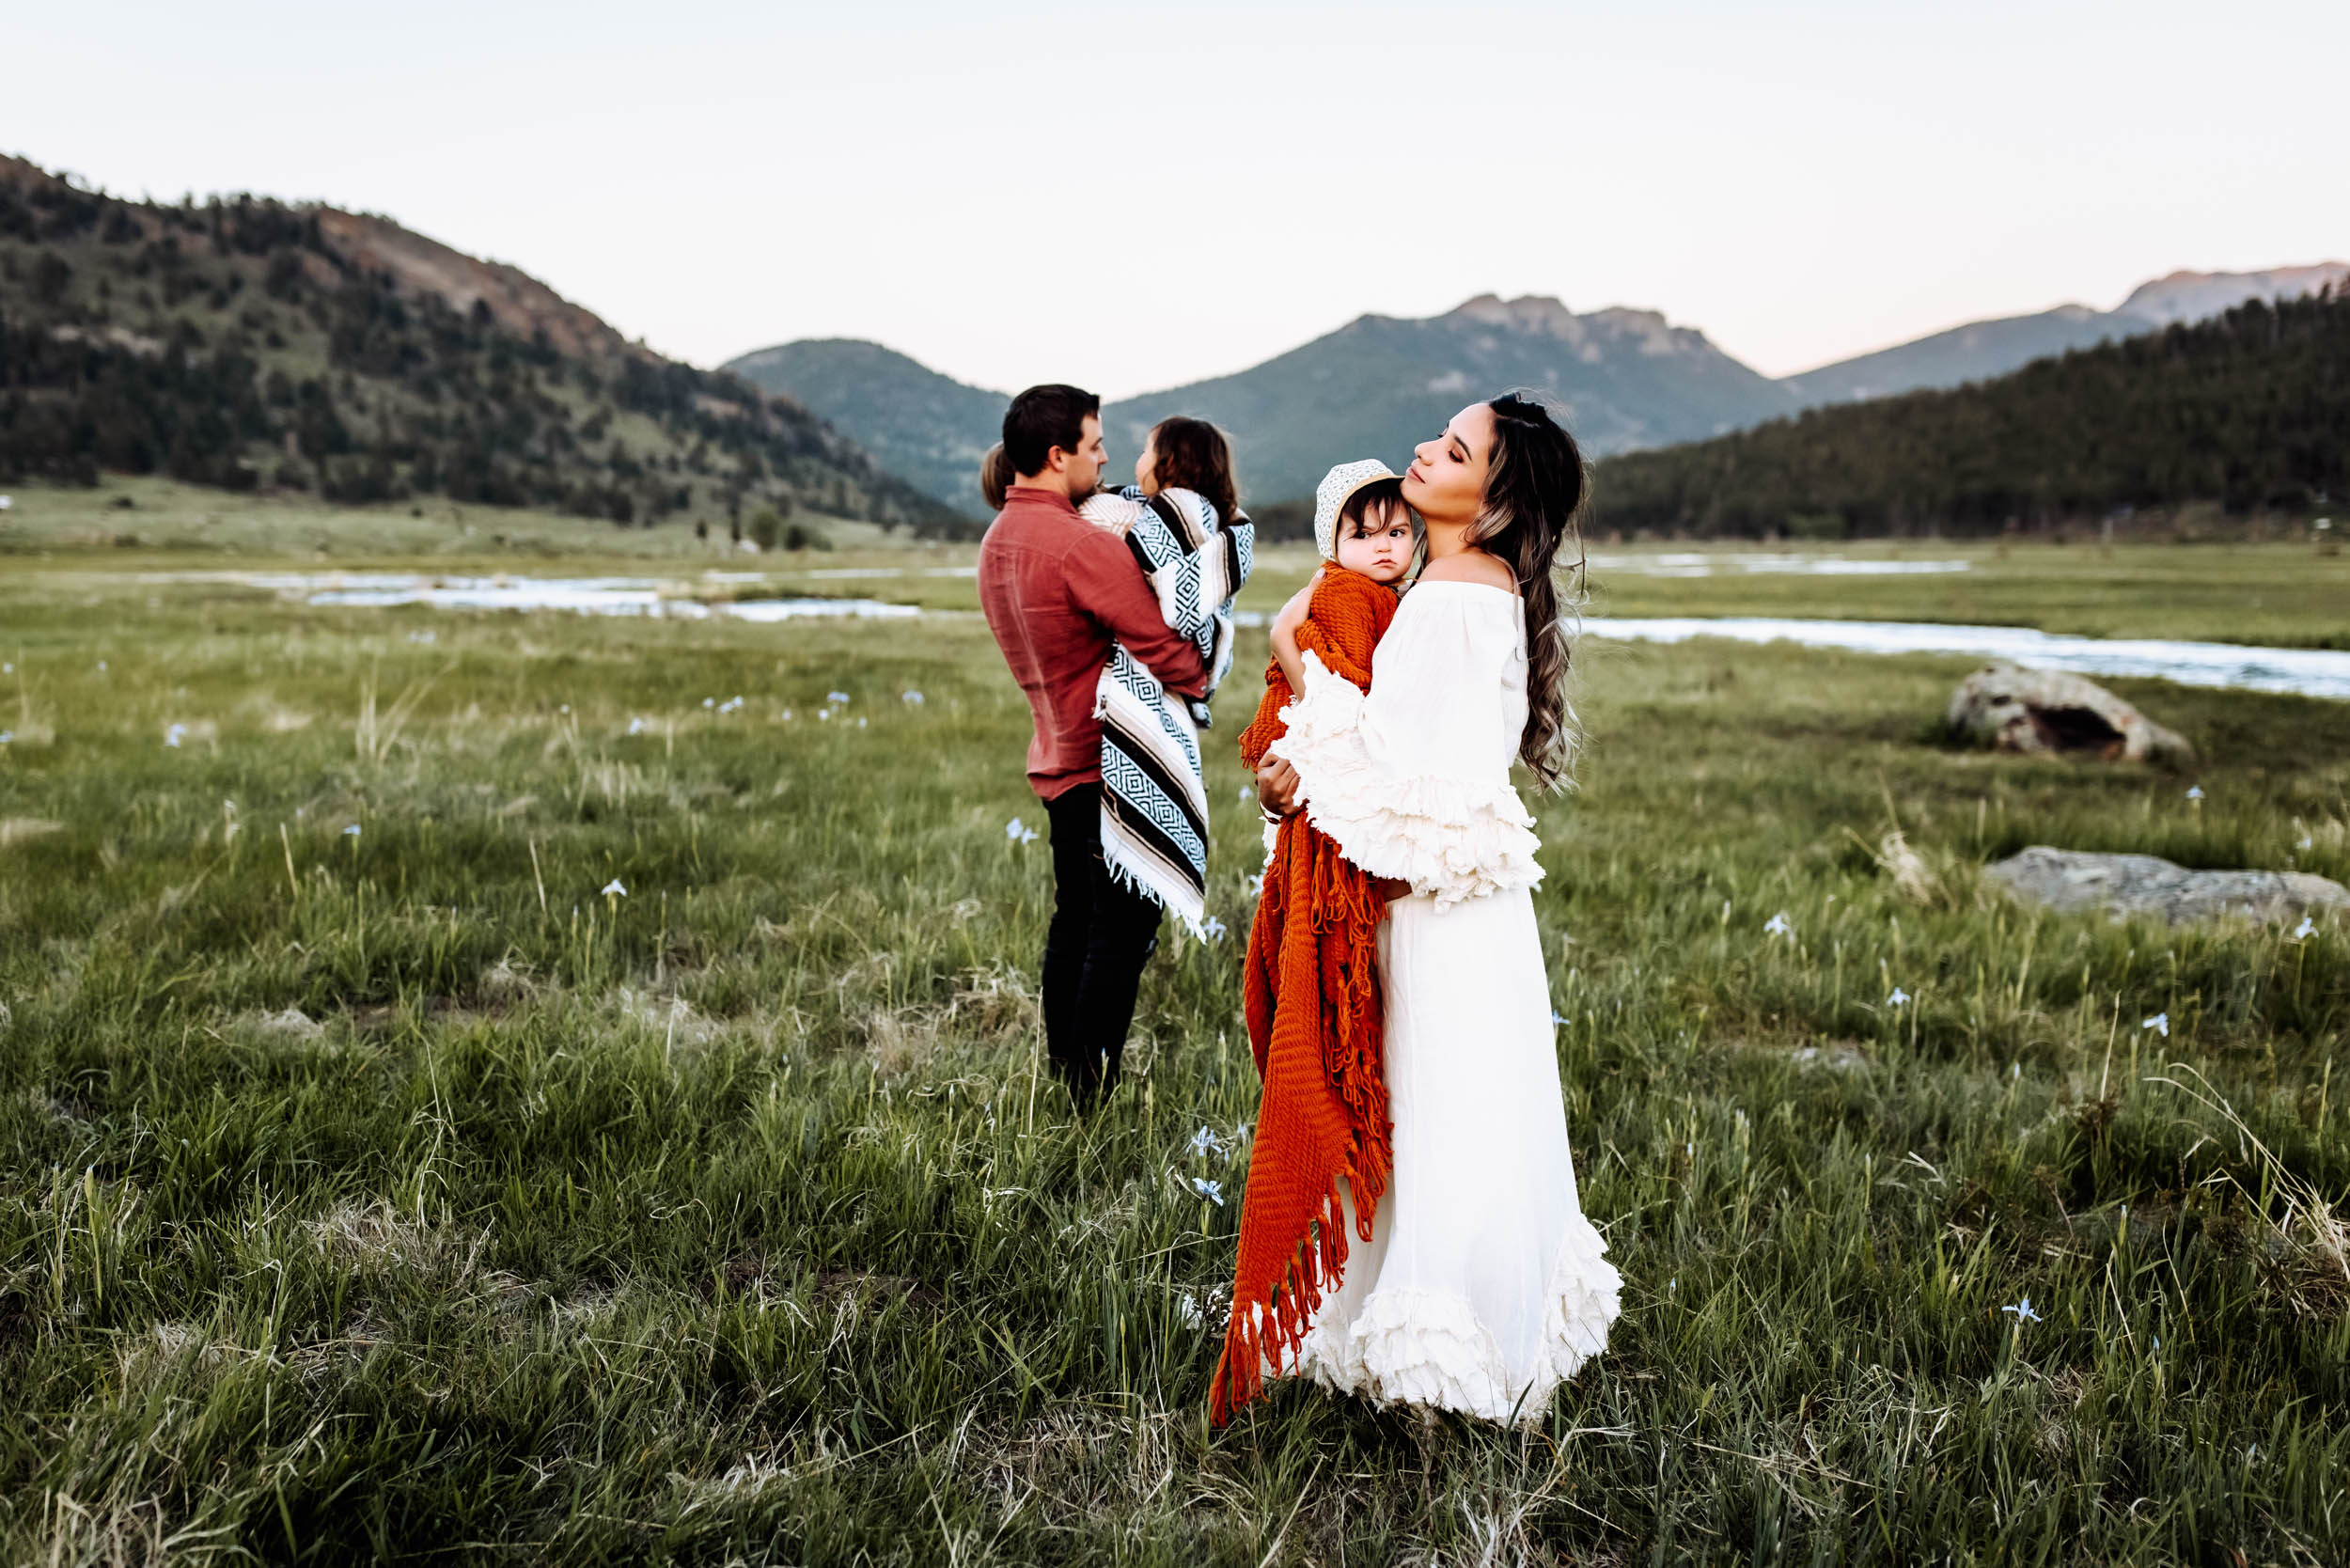 Fall Photo Sessions in Colorado Springs